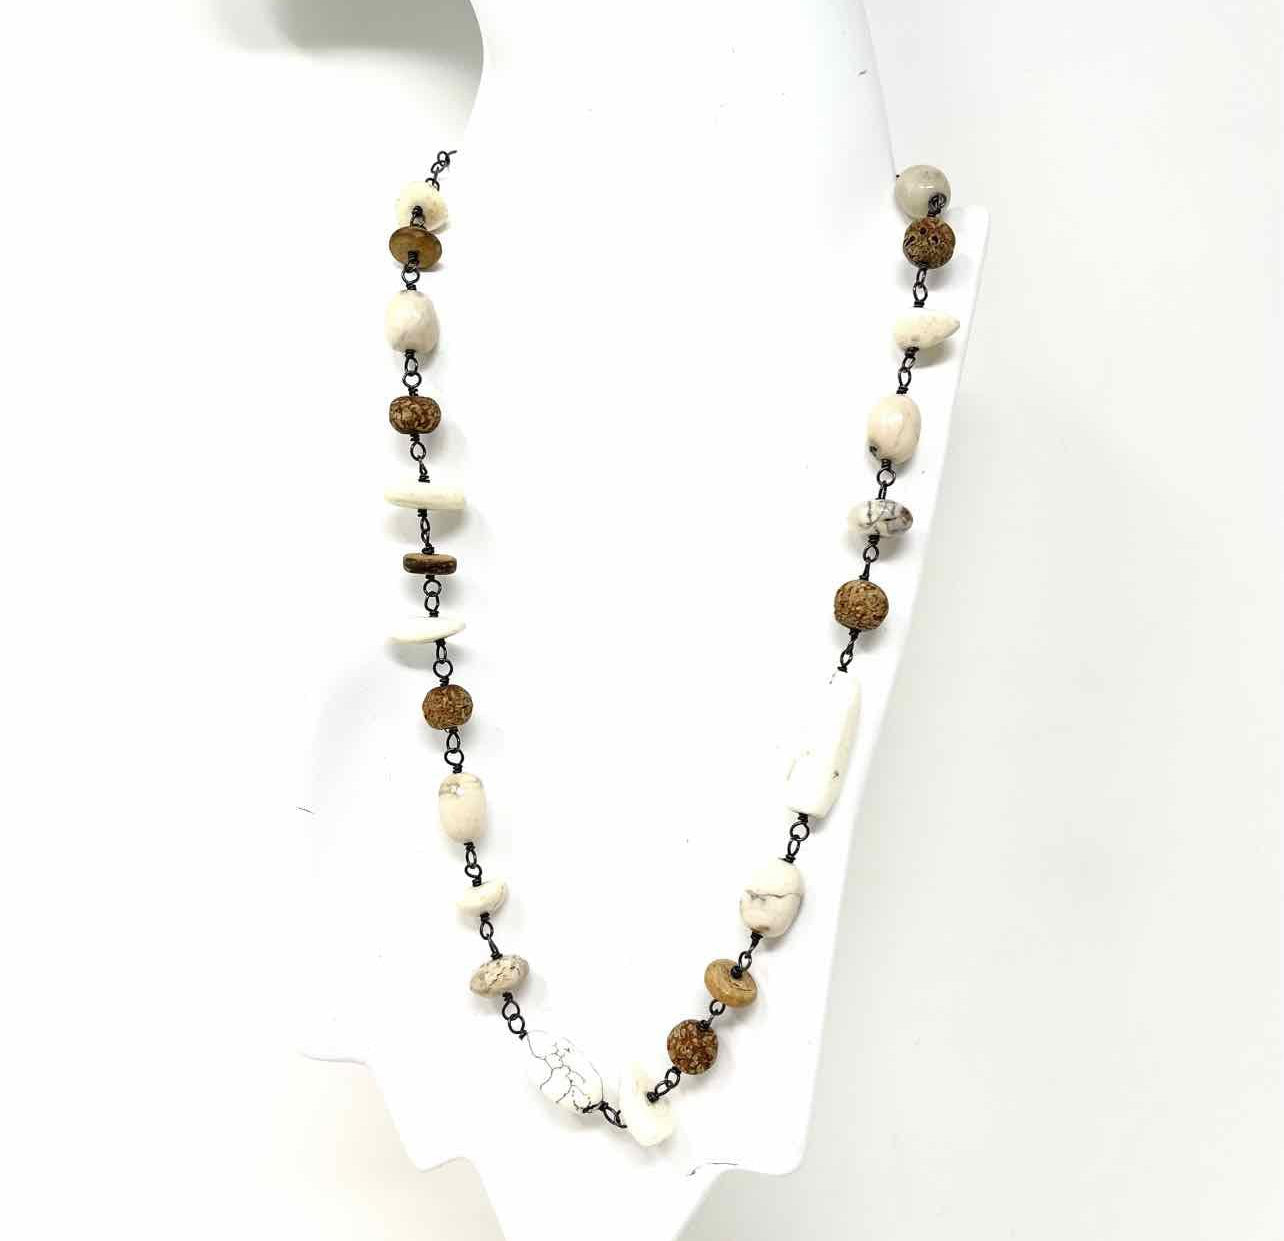 Silpada .925 Brown/White Stone Necklace - Article Consignment